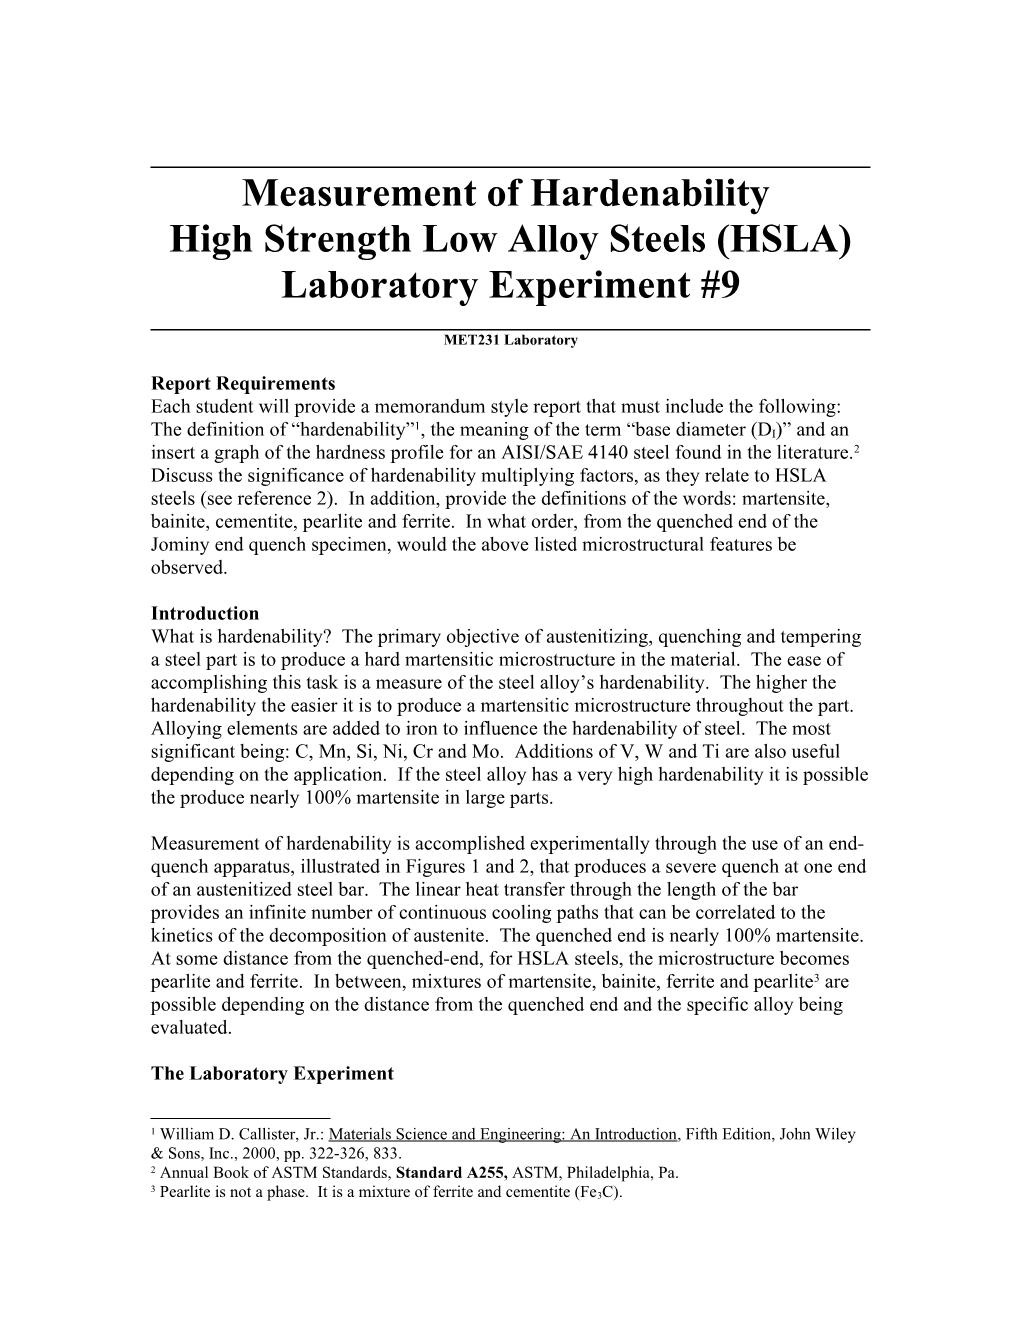 Measurement of Hardenability of High Strength Low Alloy Steels